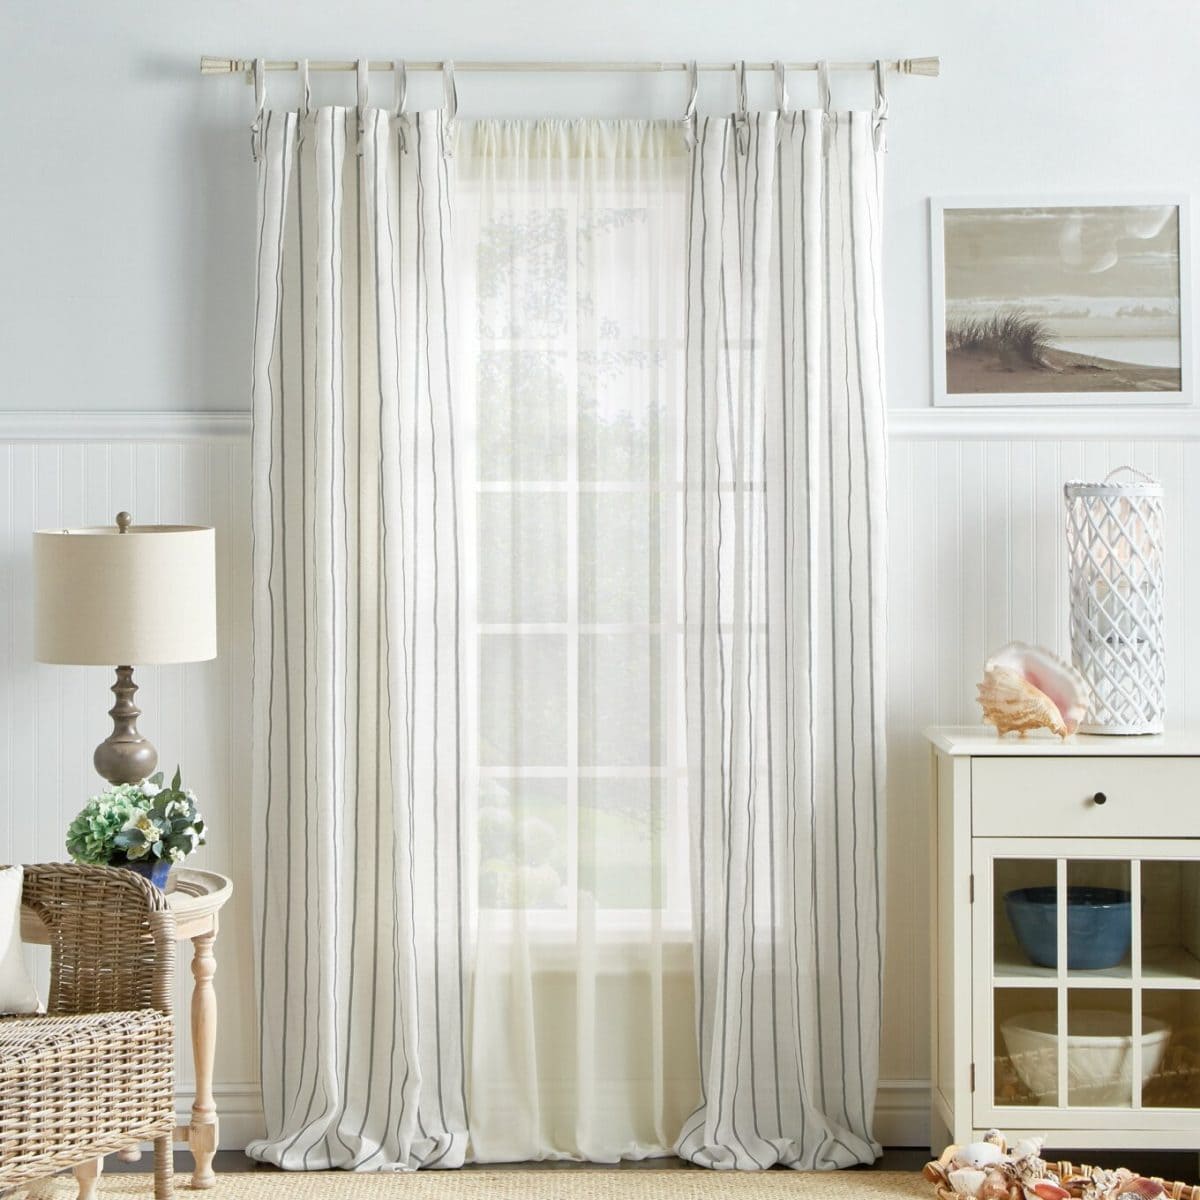 7 White And Grey Striped Curtains 1200x1200 